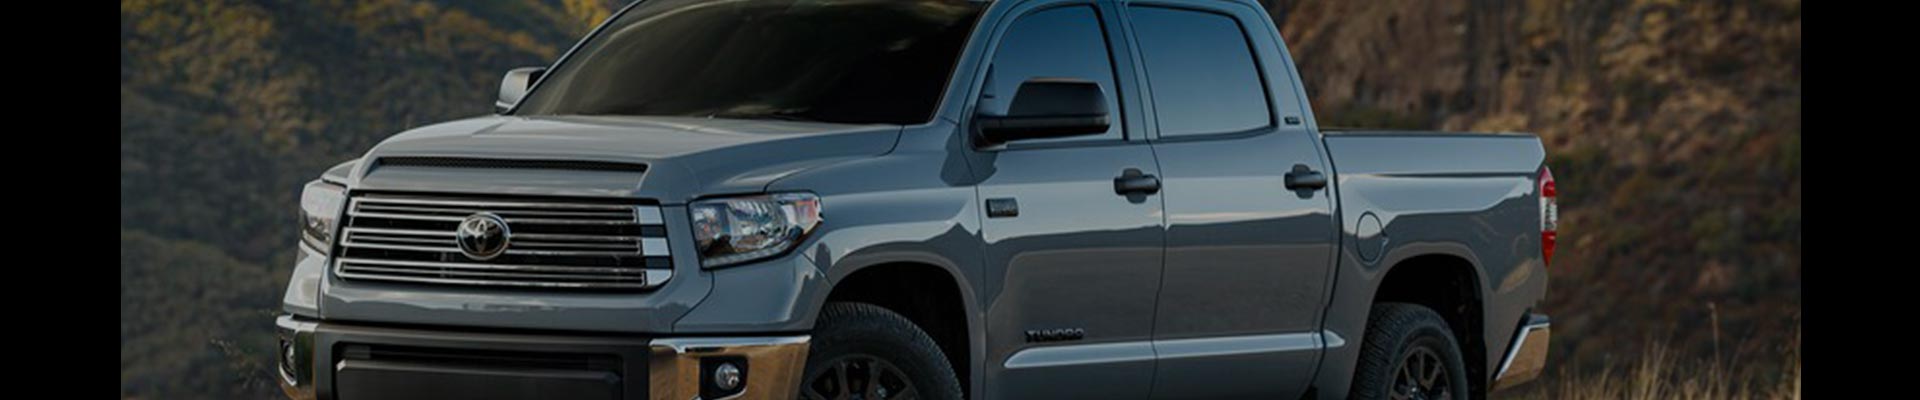 Shop Replacement and OEM 2000 Toyota Tundra Parts with Discounted Price on the Net